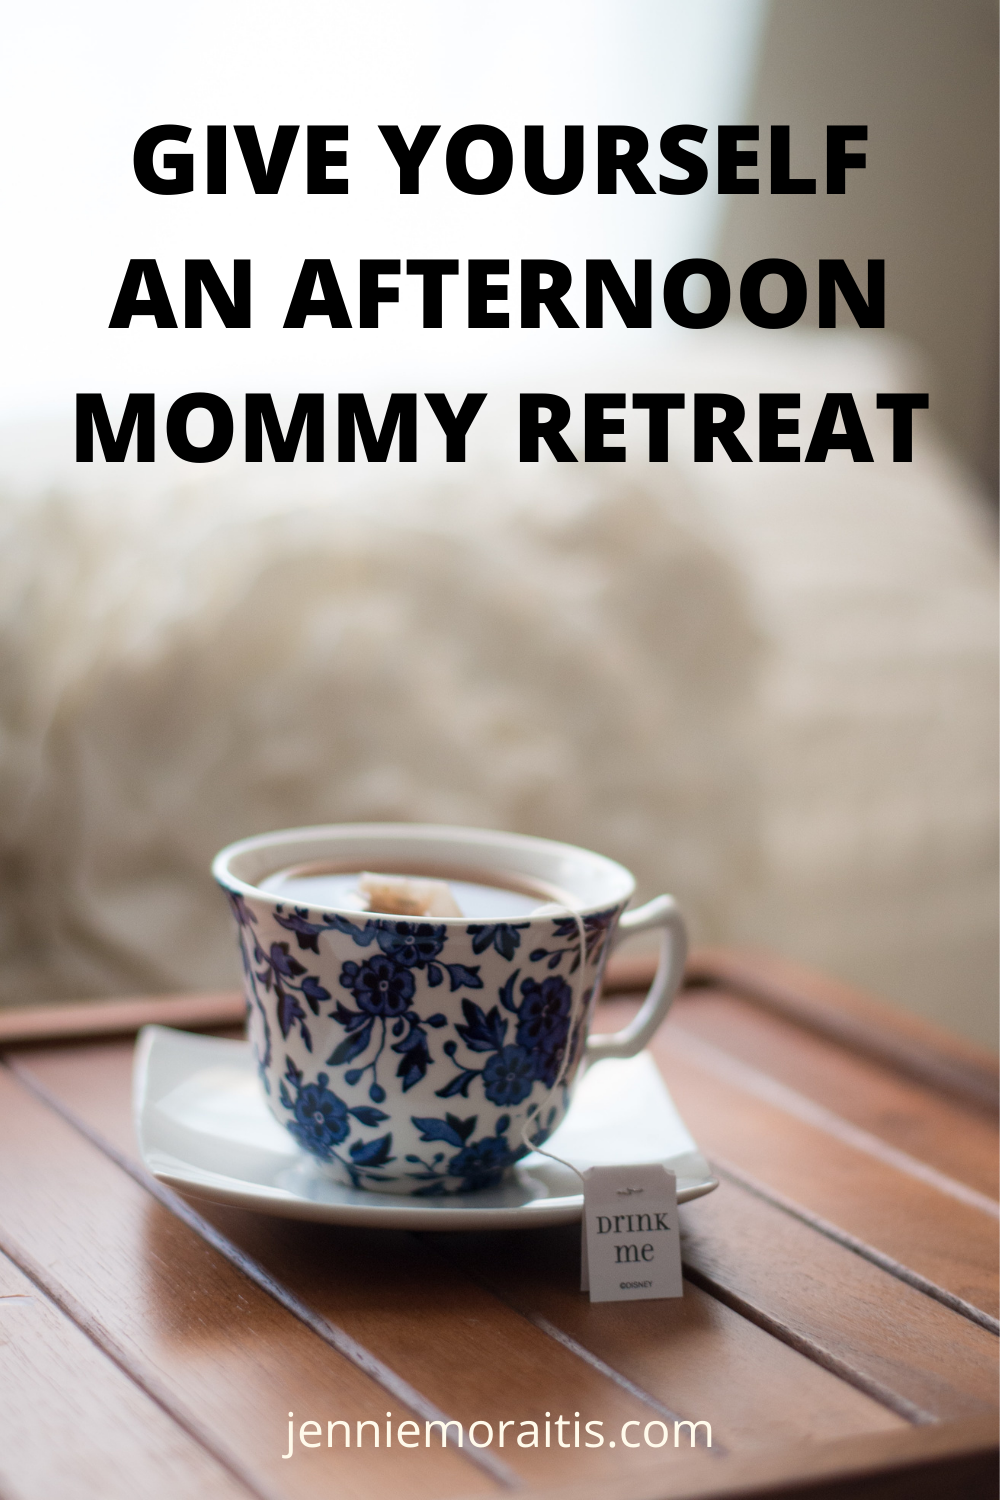 Wouldn’t it be nice to escape on a retreat in the afternoon? Maybe you can’t actually leave the house because you have littles, but you can still treat yourself to some quiet time and a retreat. Here’s how...